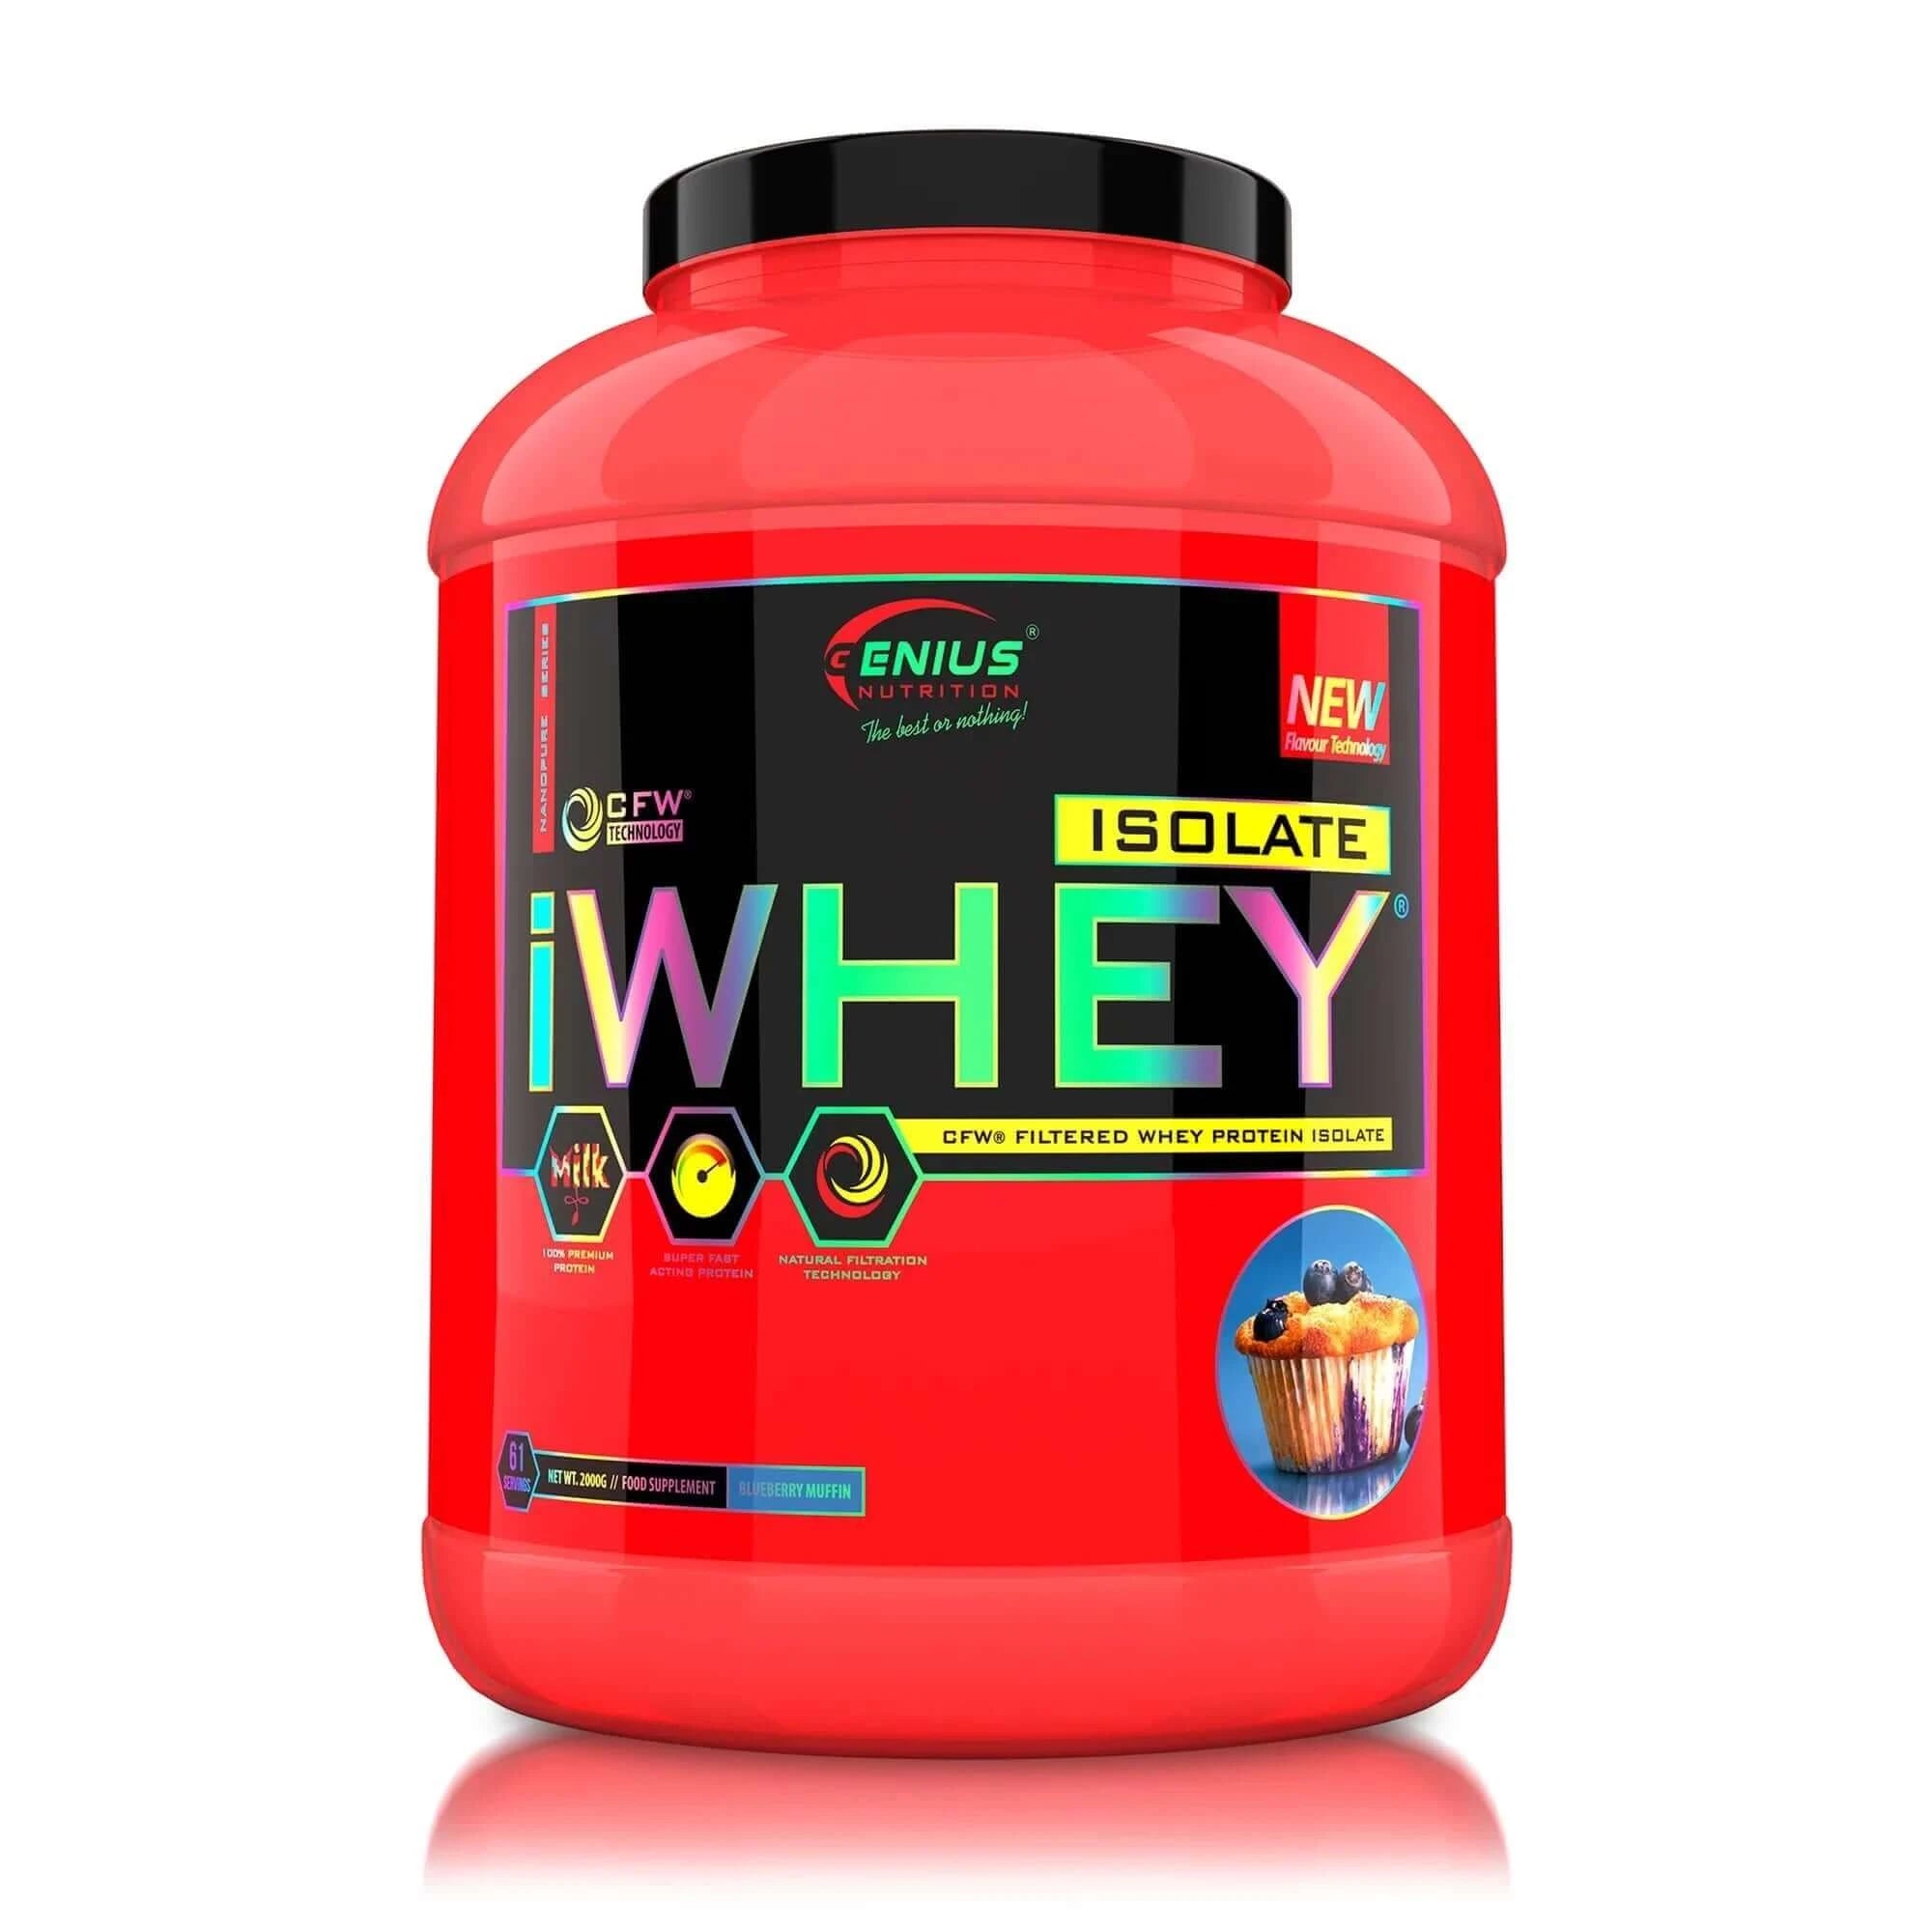 whey-iwhey isolate-protein-muffin-2000g-genius-nutrition